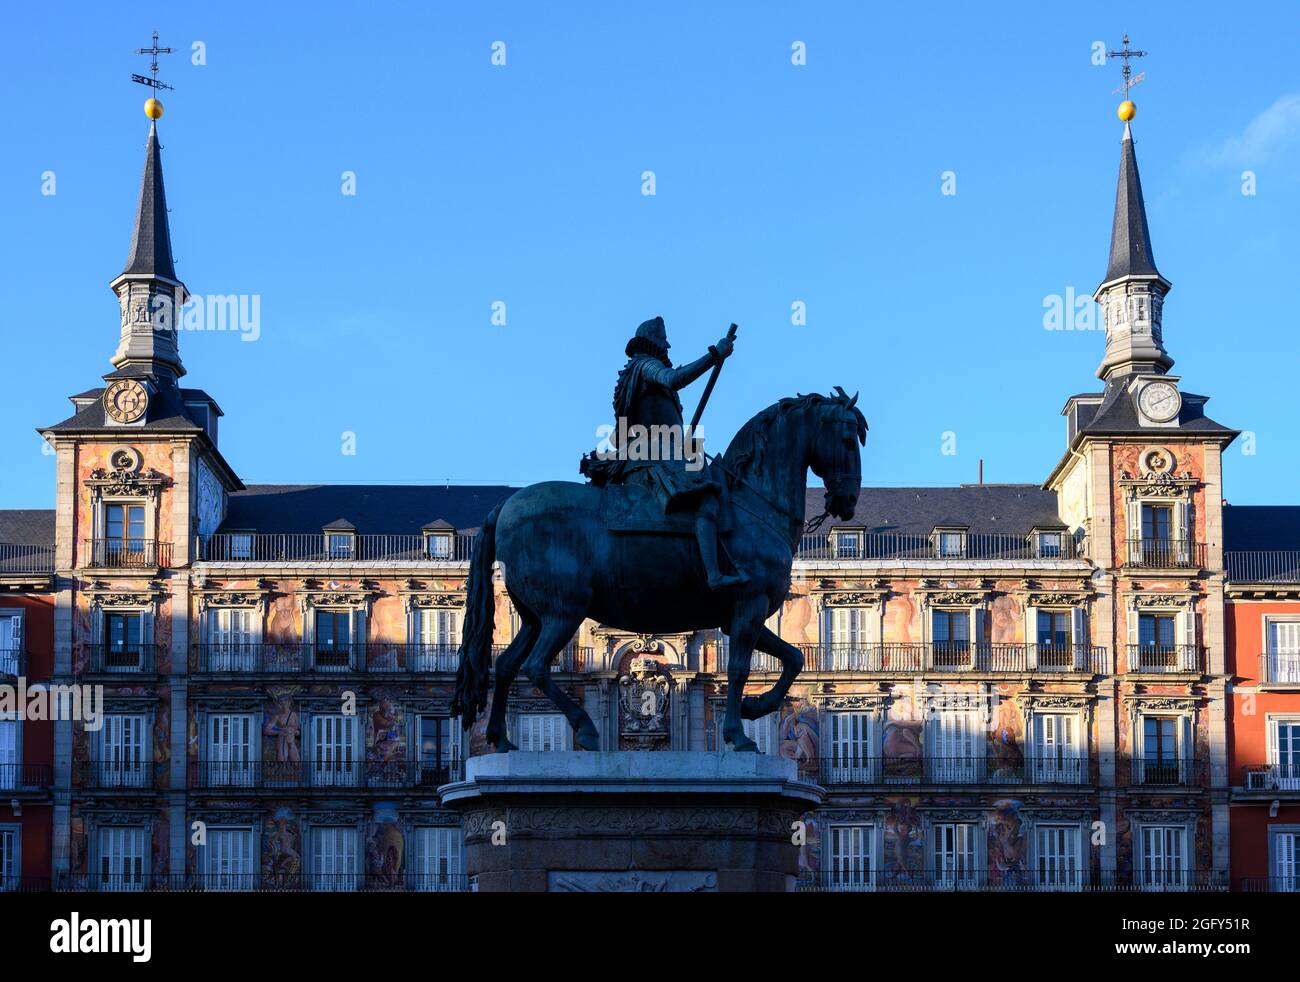 Equestrian statue of Philip III with the Casa de la Panaderia in the background in the Plaza Mayor, central Madrid, Spain. Stock Photo